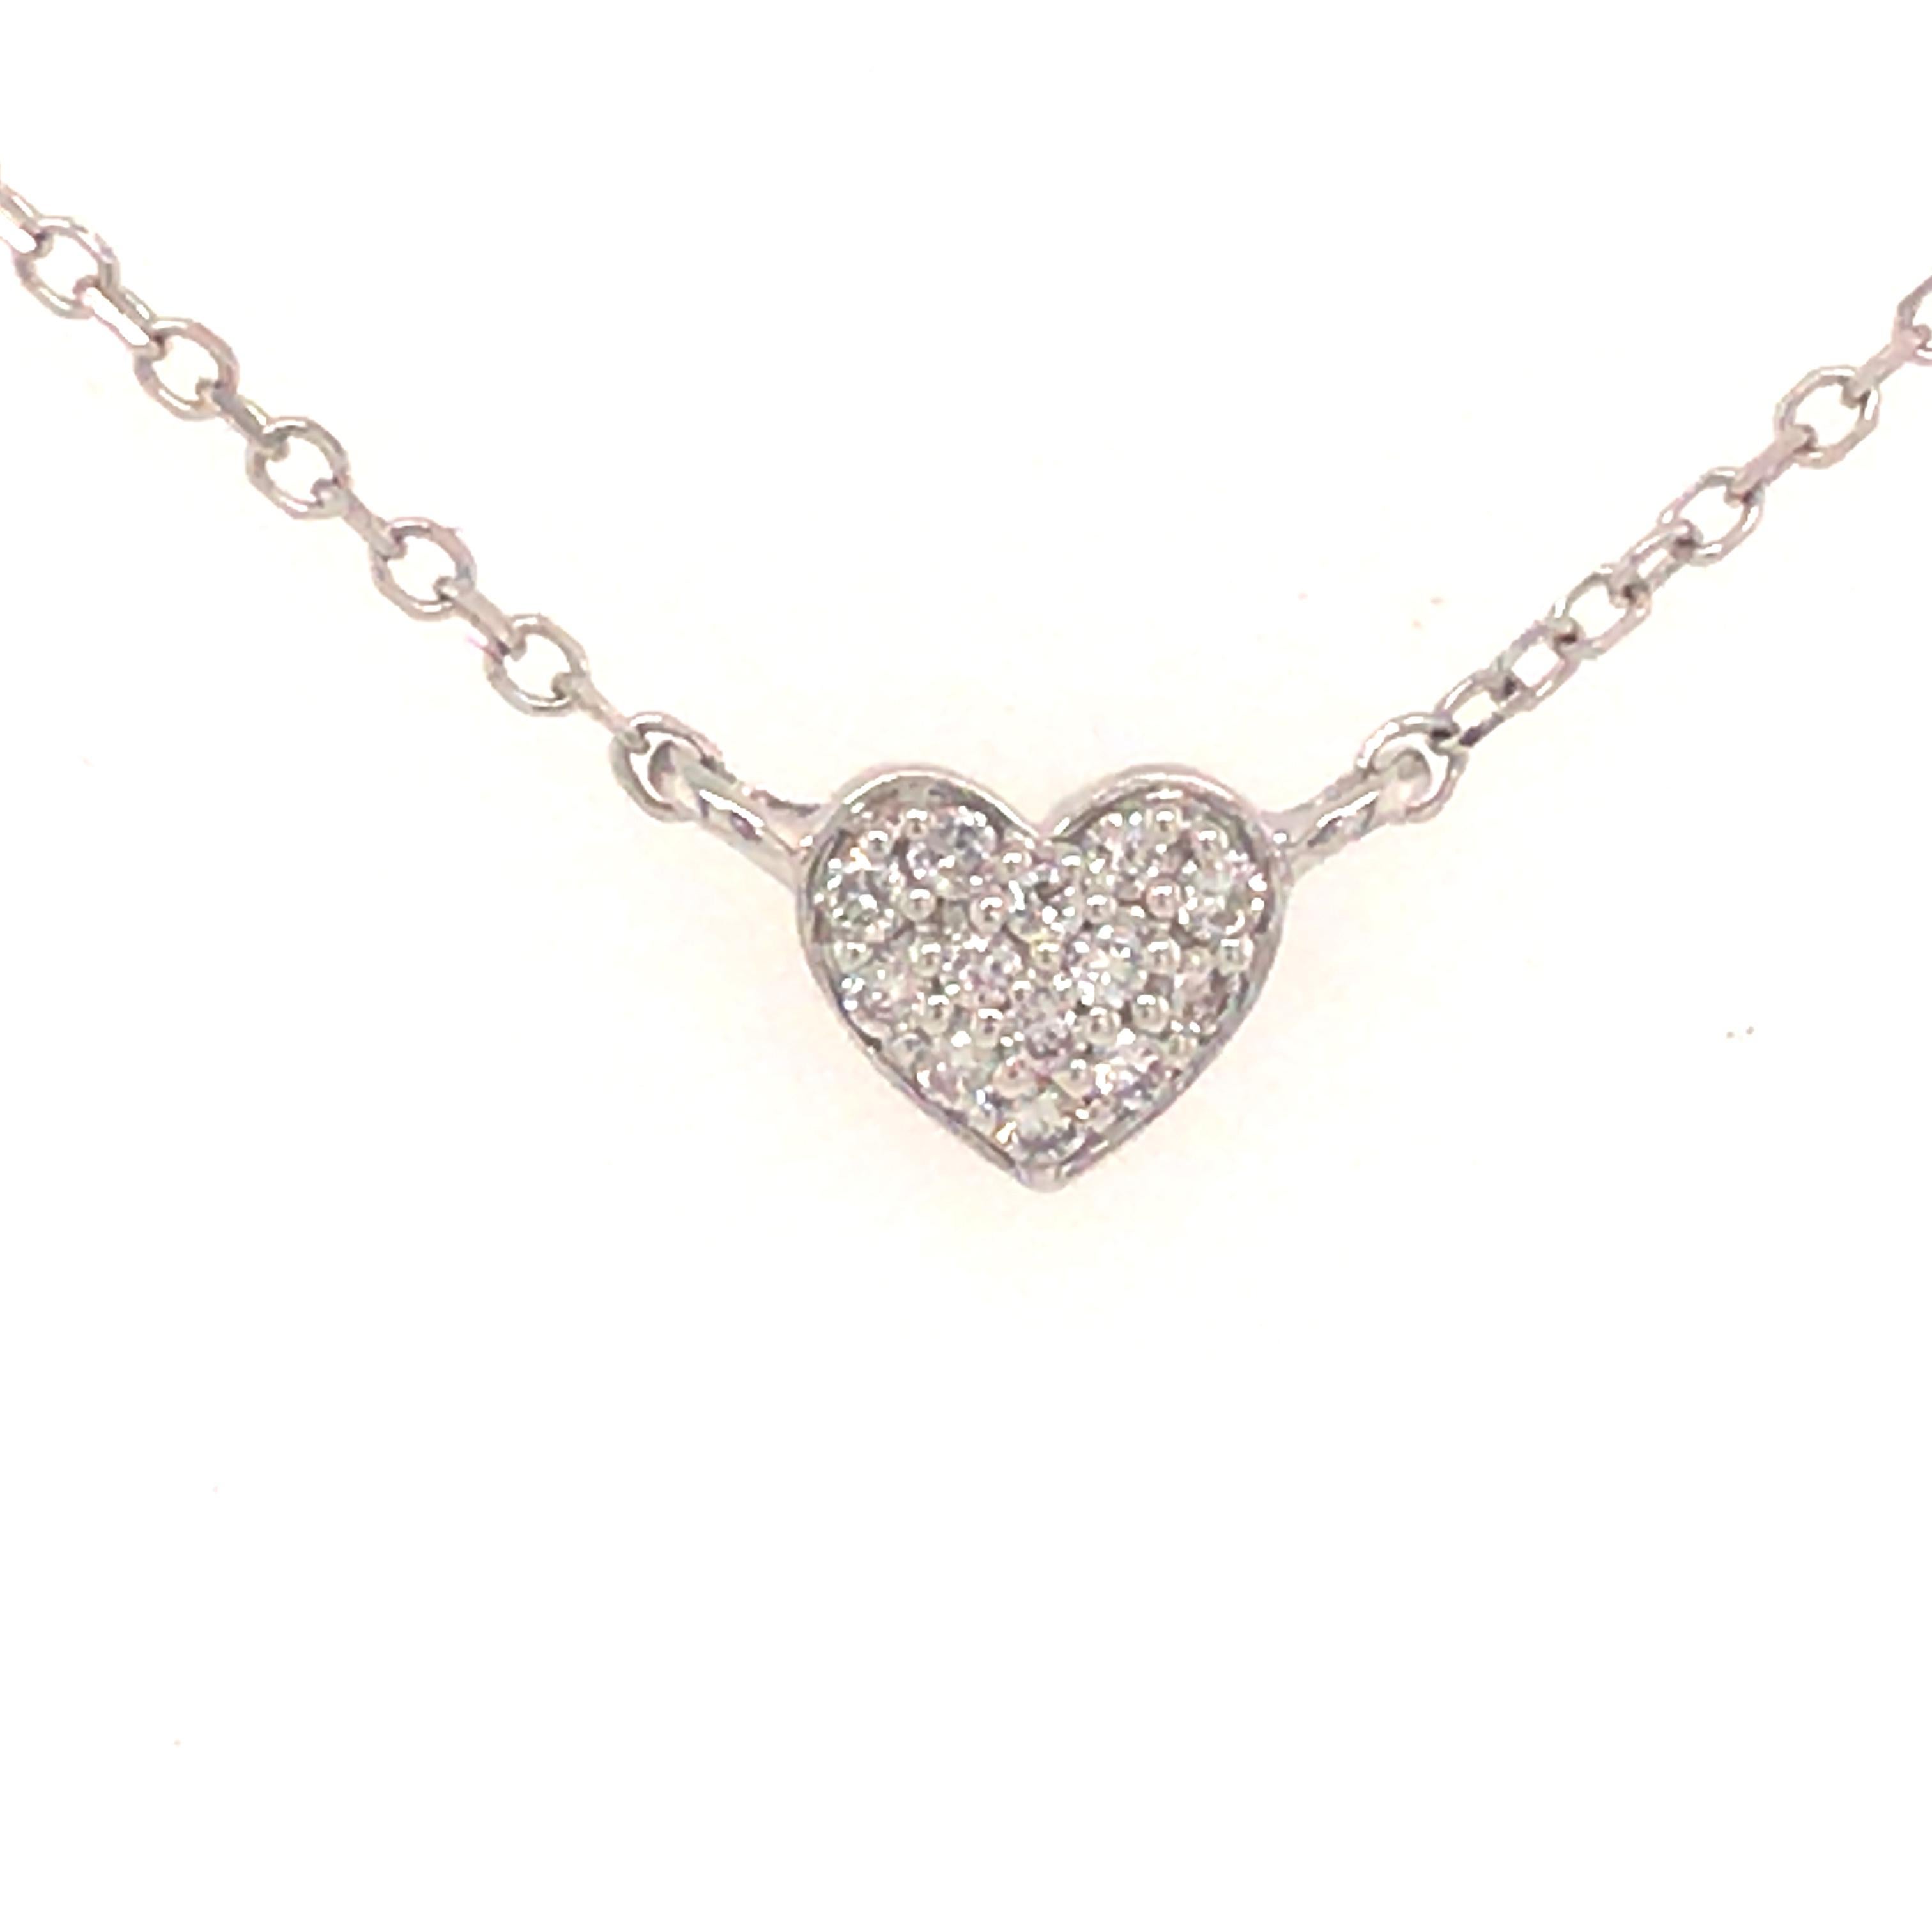 A unique Diamond Heart Shaped Cluster Station Necklace in 14K White Gold.  (5) Heart shaped stations are set with Round Brilliant Cut Diamonds weighing .34 carat total weight, G-H in color and VS-SI in clarity. The necklace is 18 inches in length